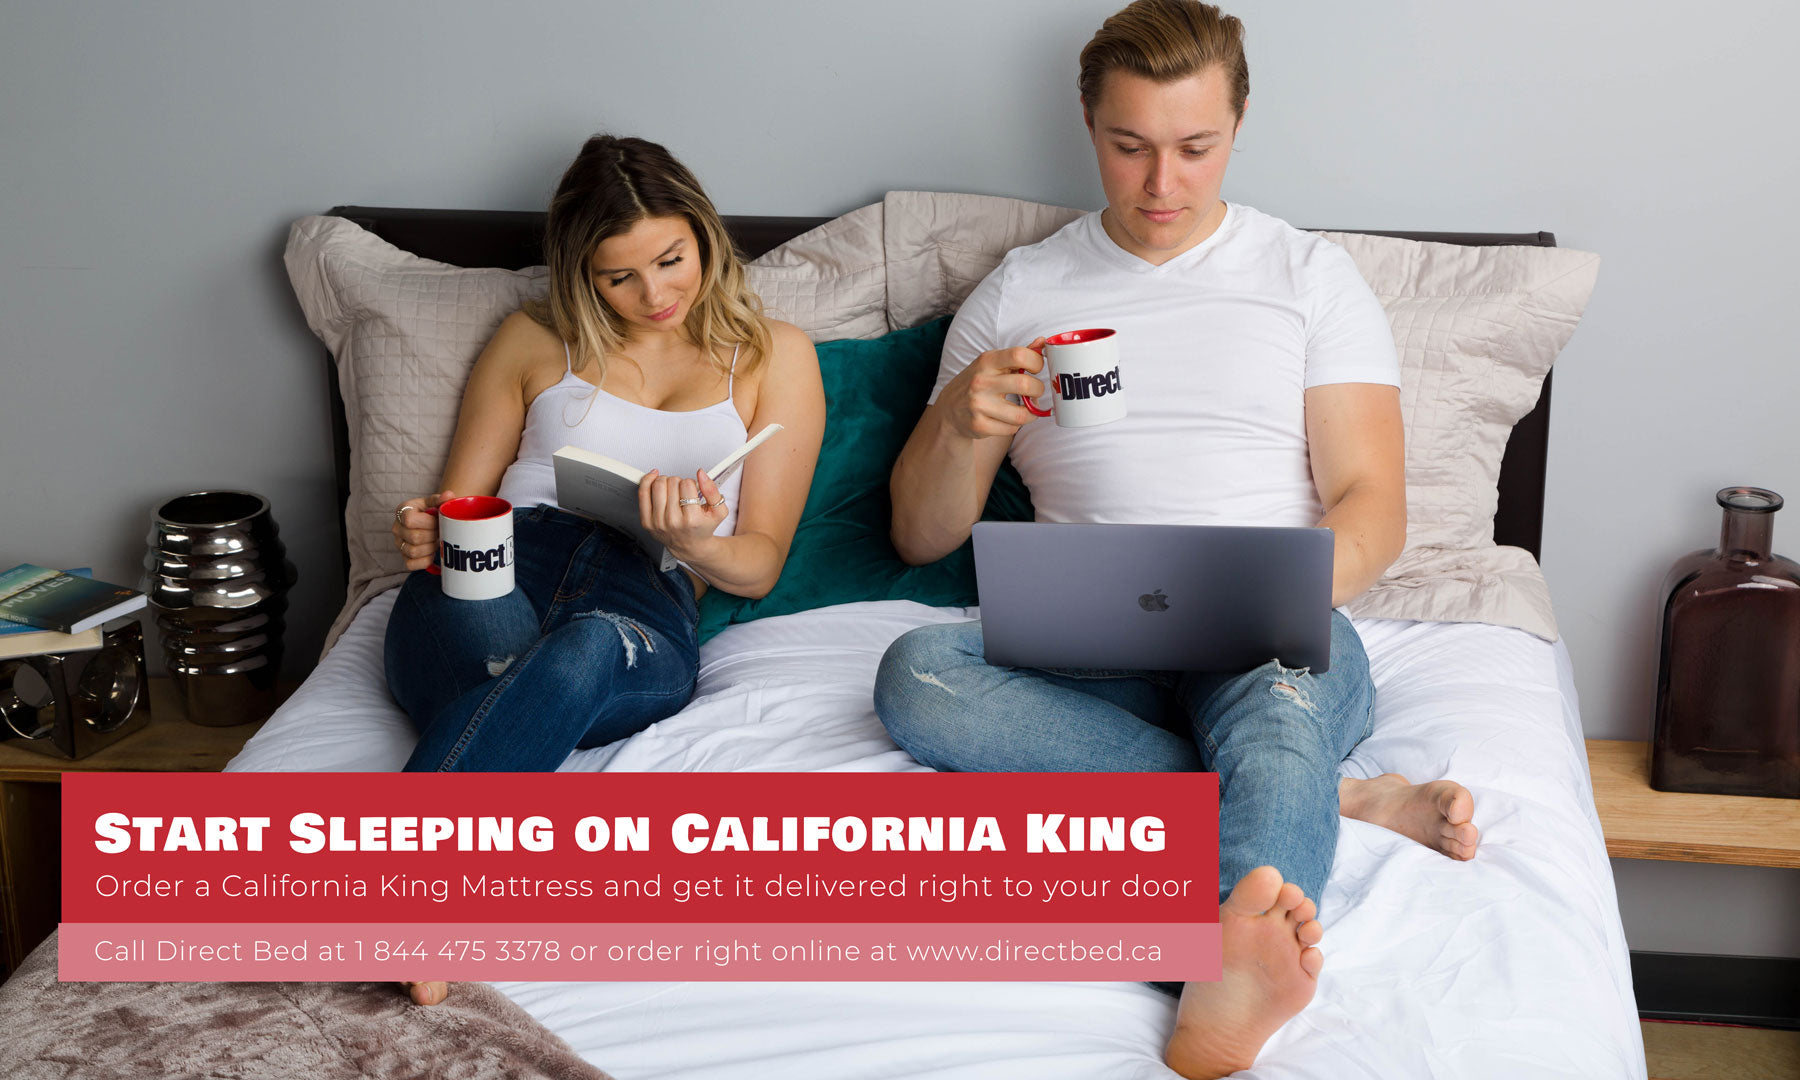 California King Size Mattresses order online or over the phone from direct bed